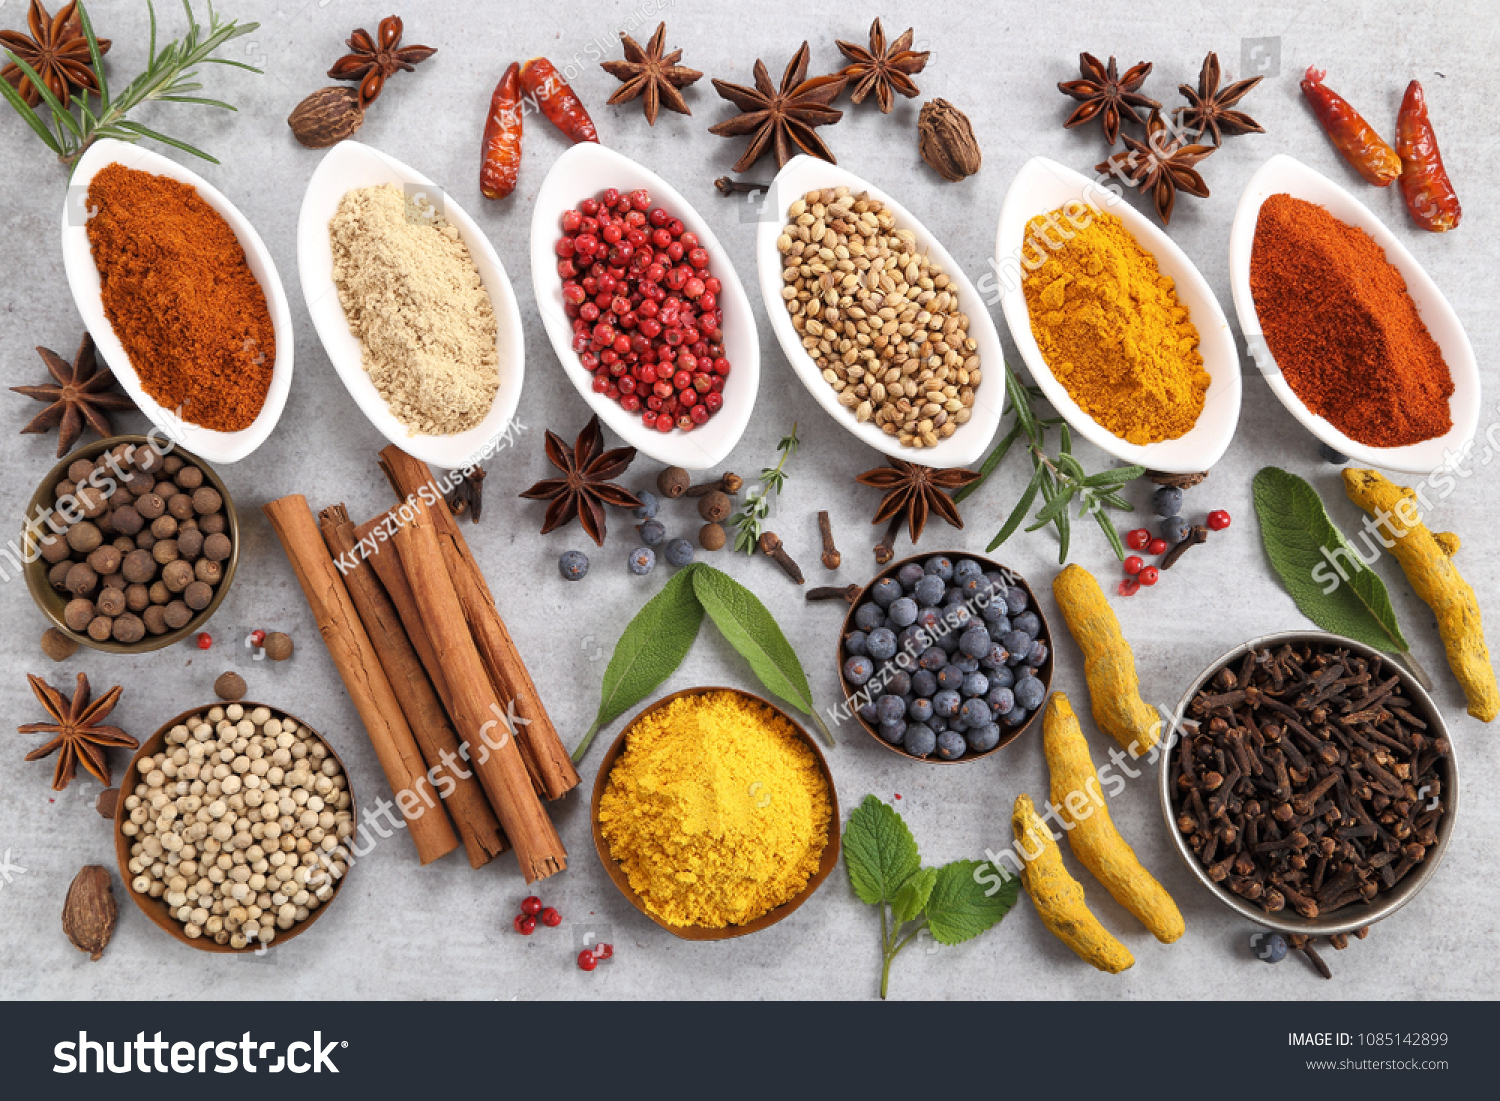 Colorful and aromatic spices and herbs. Food additives. #1085142899